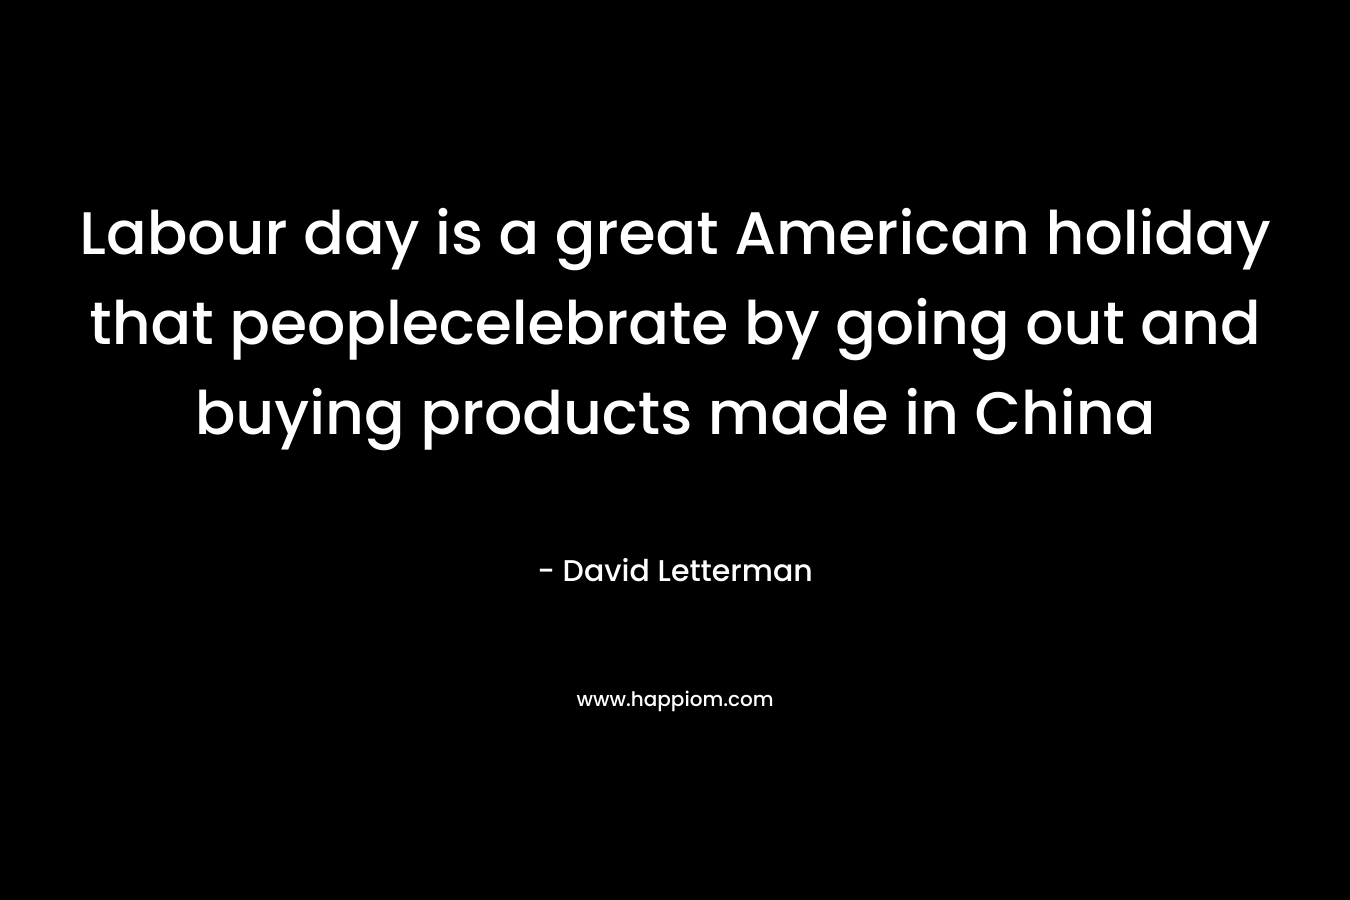 Labour day is a great American holiday that peoplecelebrate by going out and buying products made in China – David Letterman